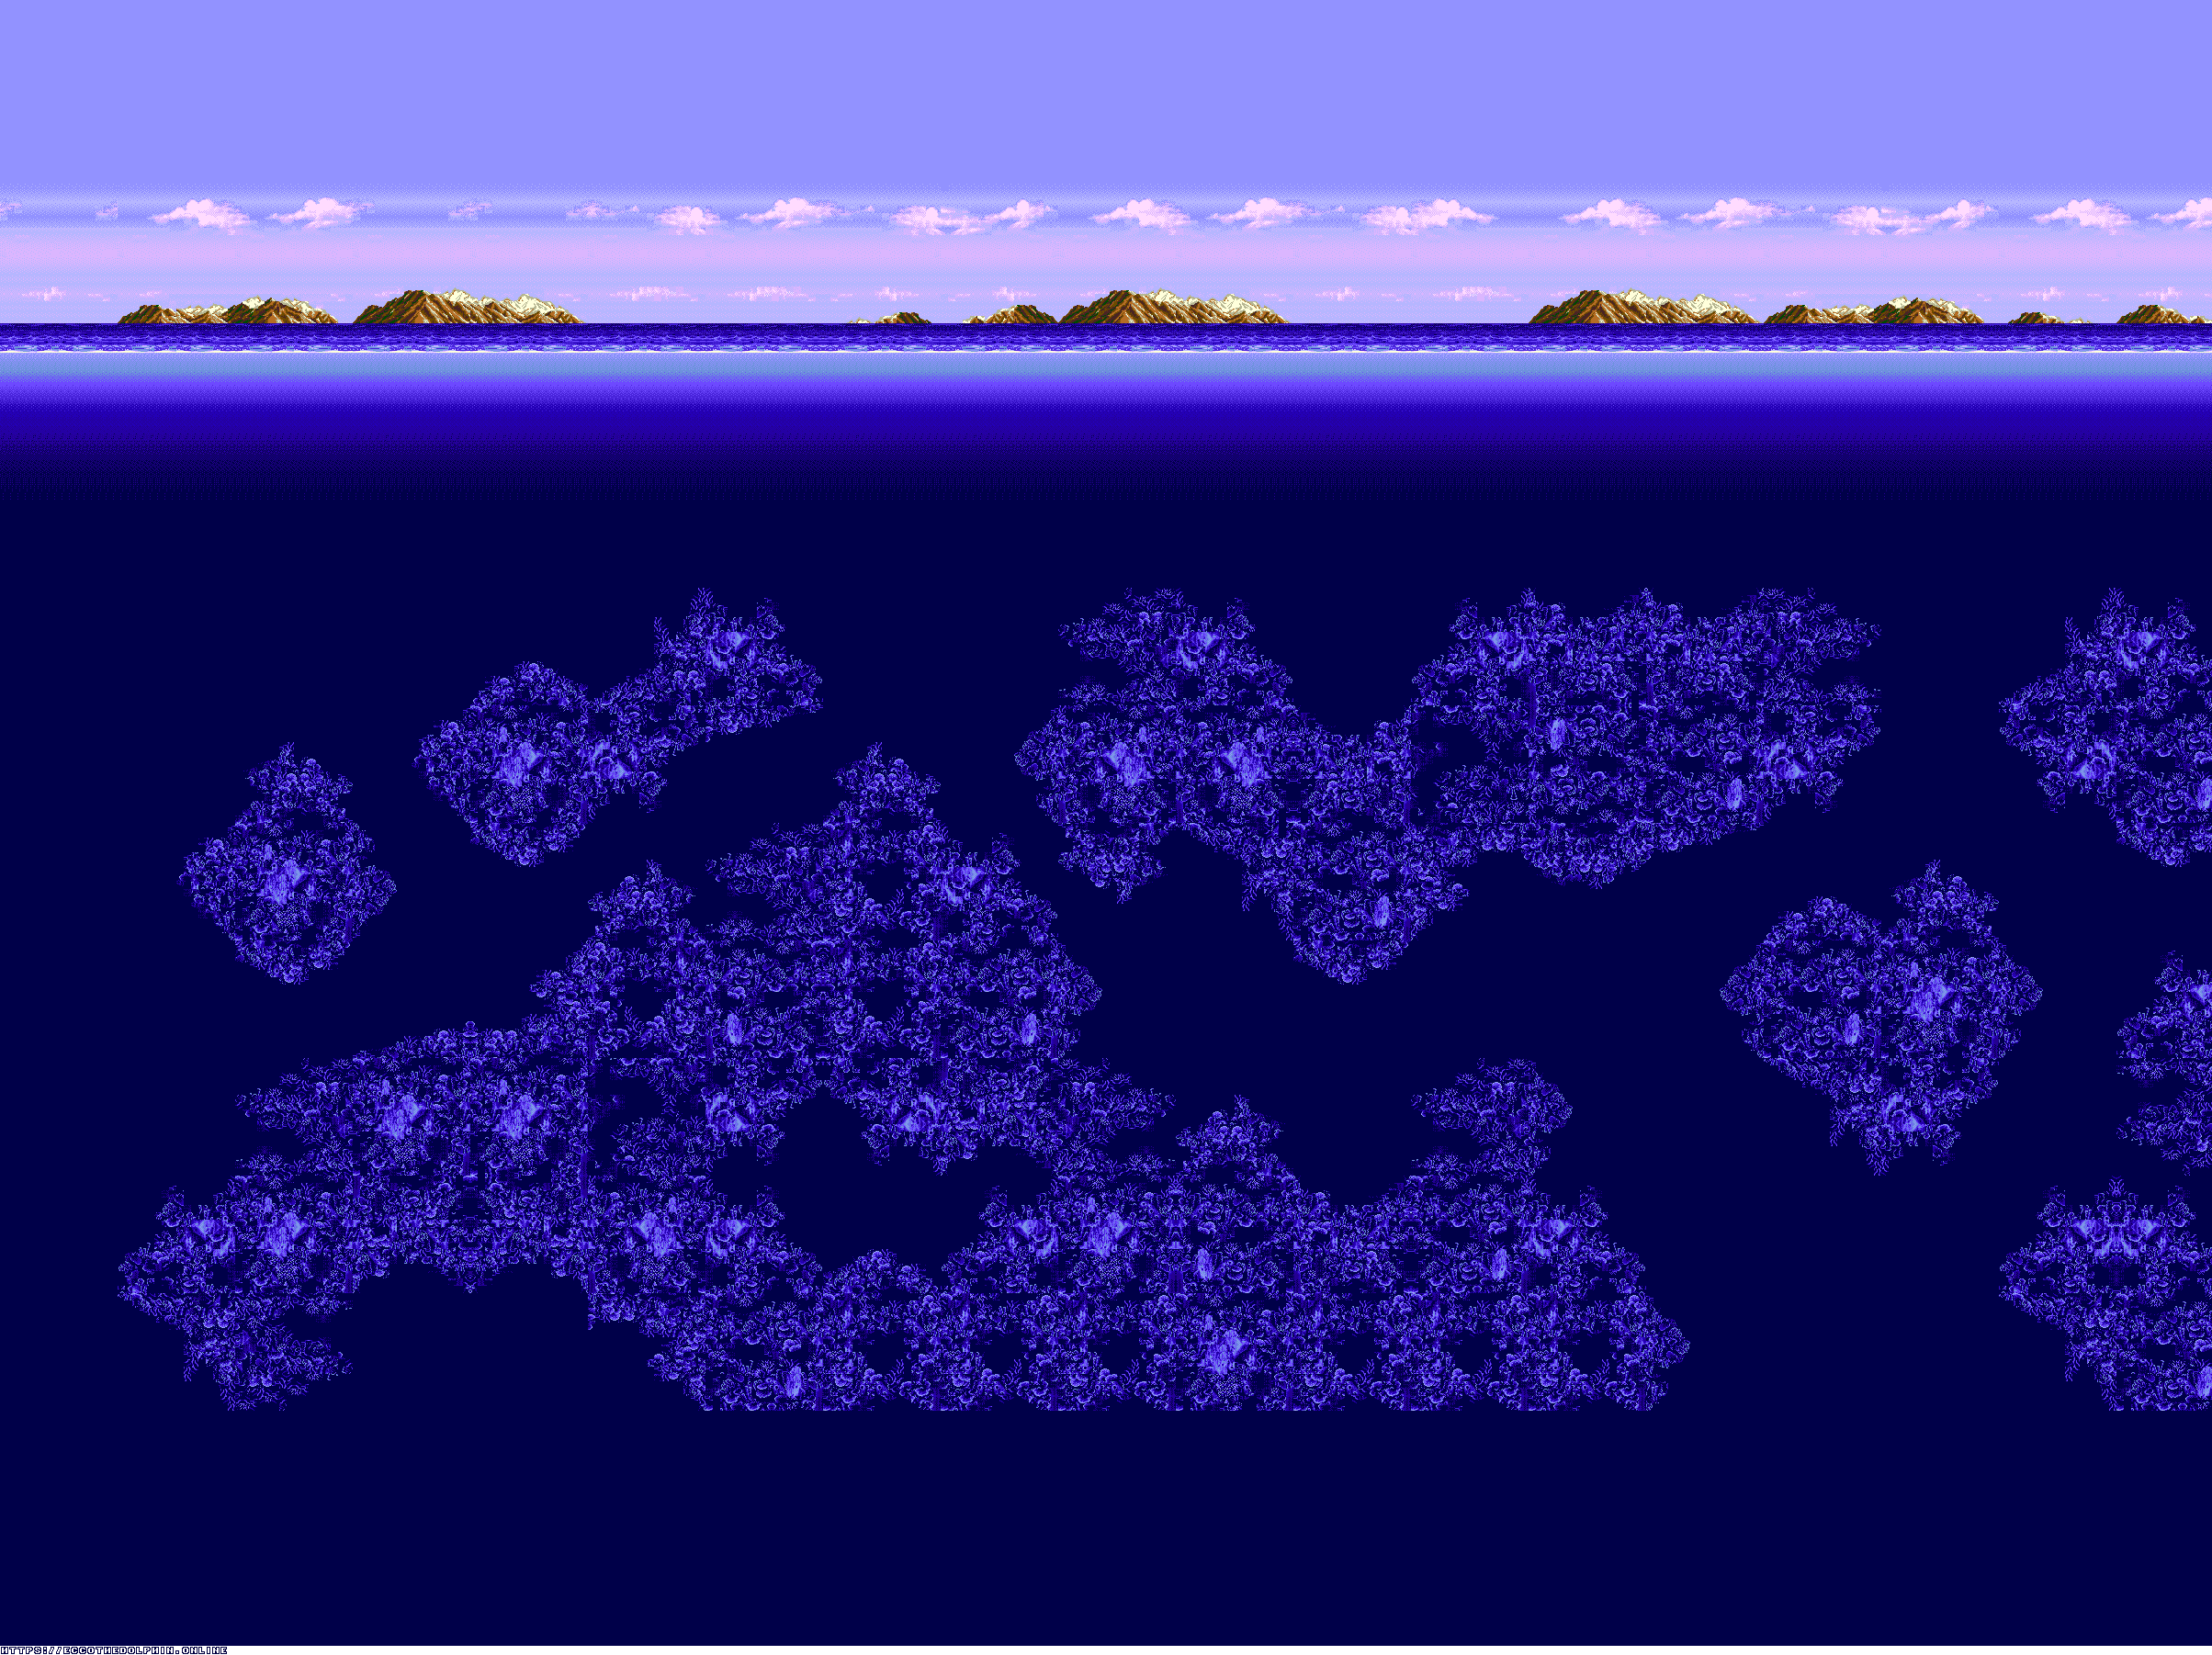 The Ocean of Mimicry (Background)